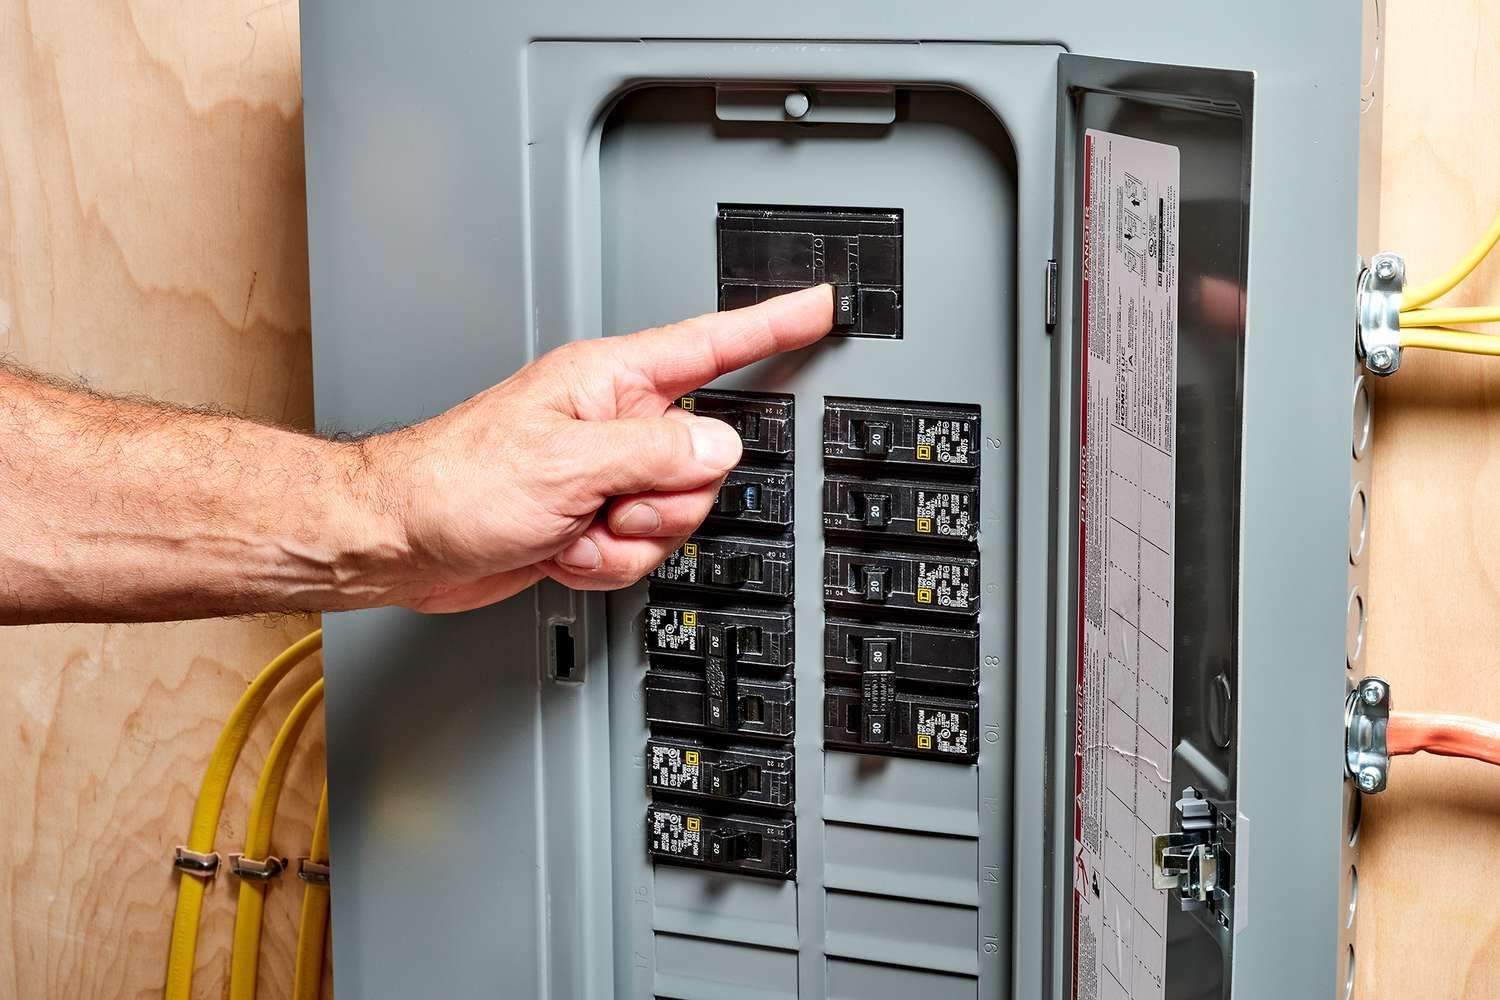 How To Change Circuit Breakers At Home